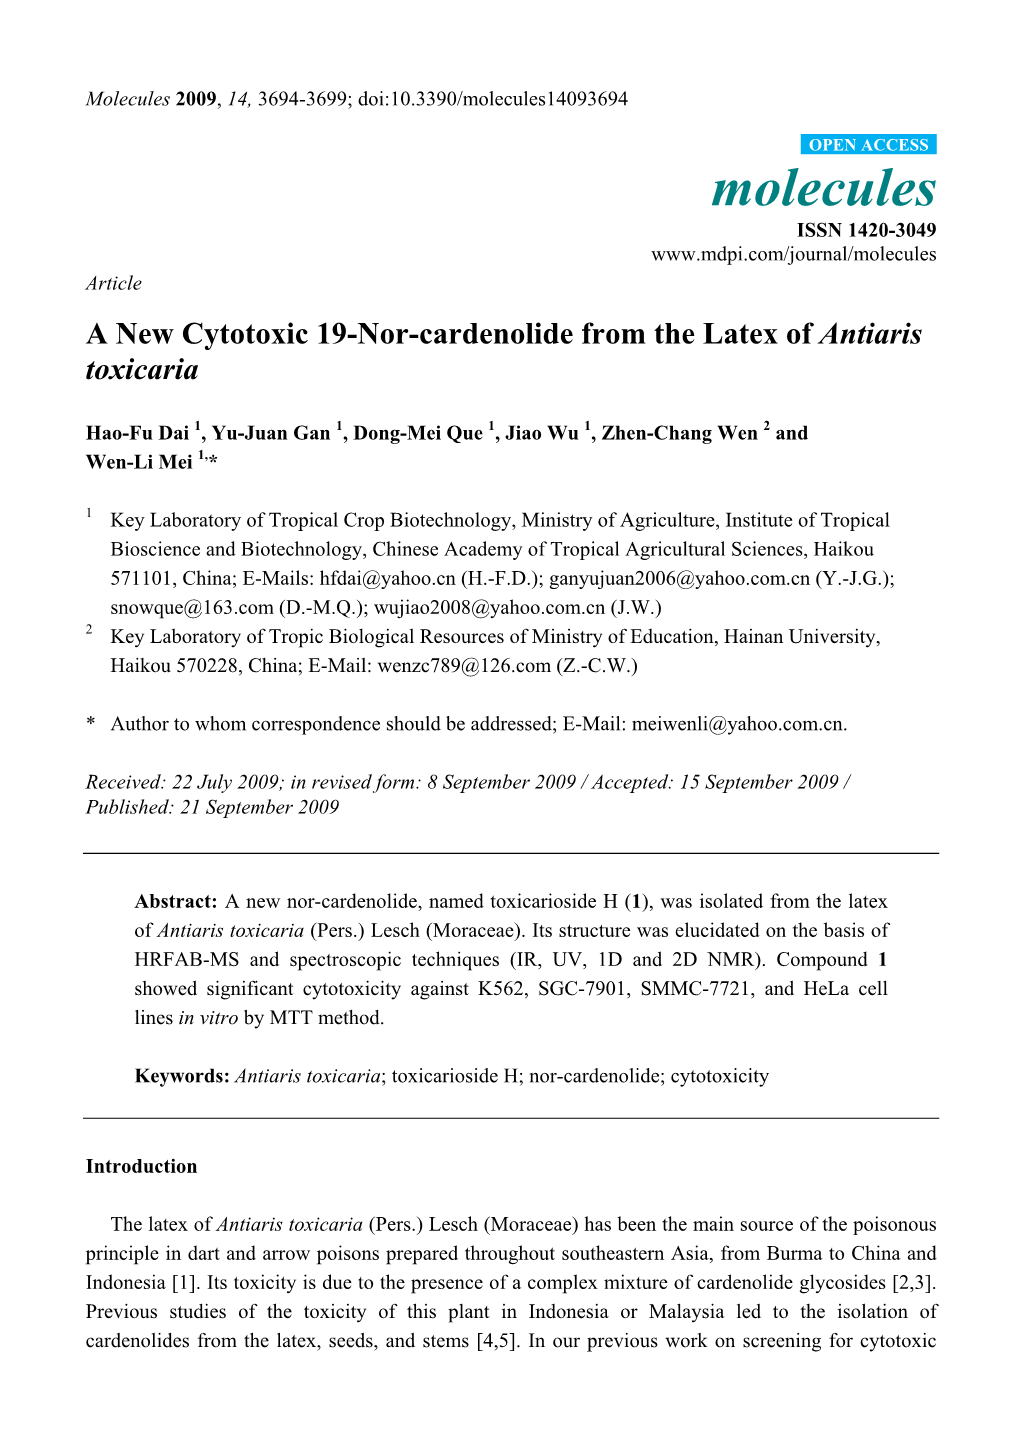 A New Cytotoxic 19-Nor-Cardenolide from the Latex of Antiaris Toxicaria